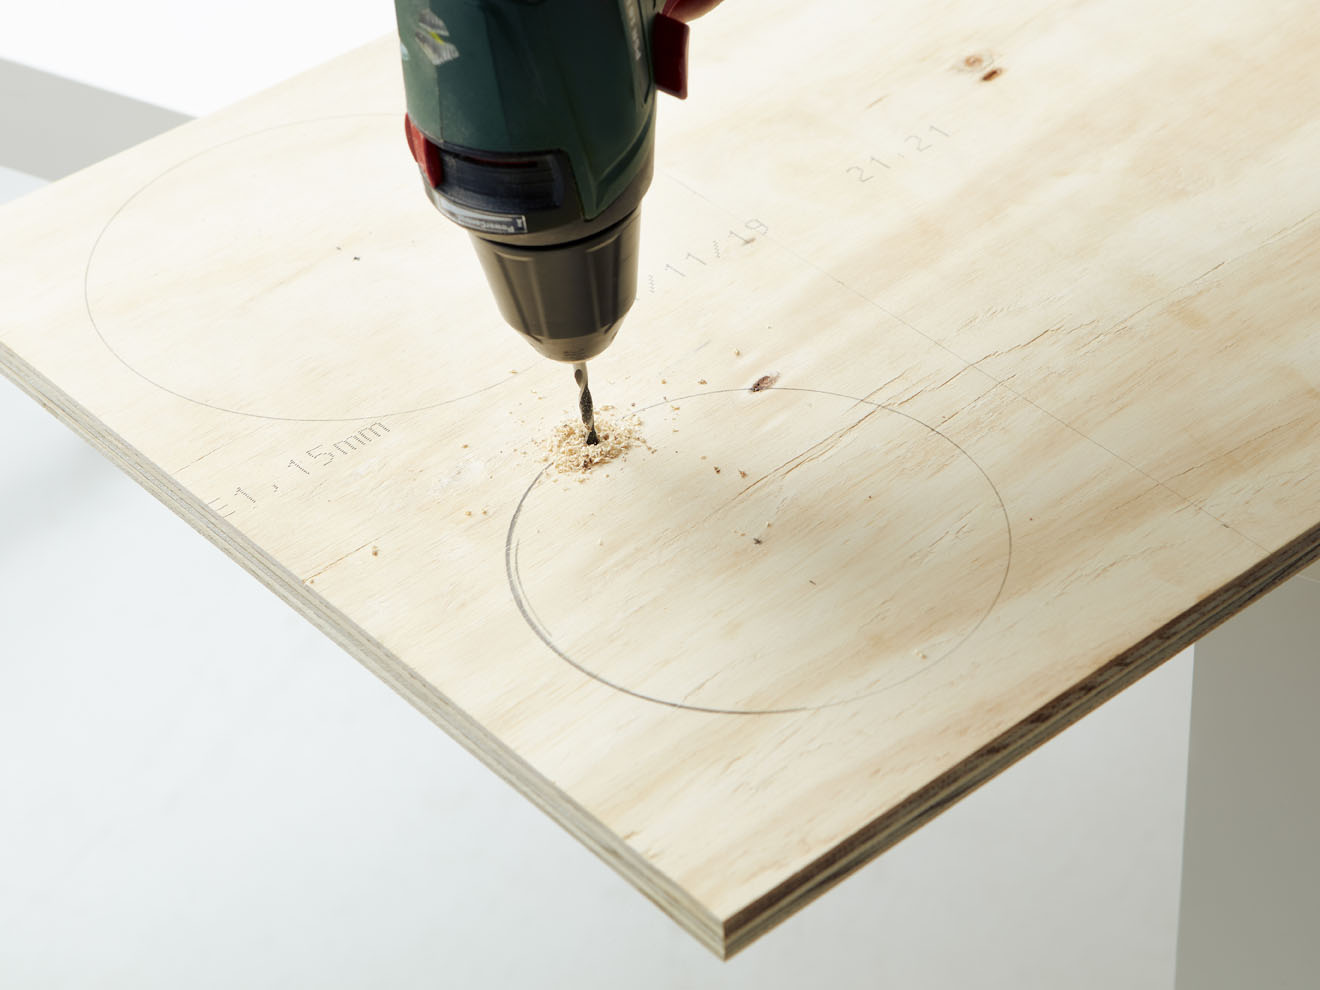 Drill a hole for your saw blade to go through.